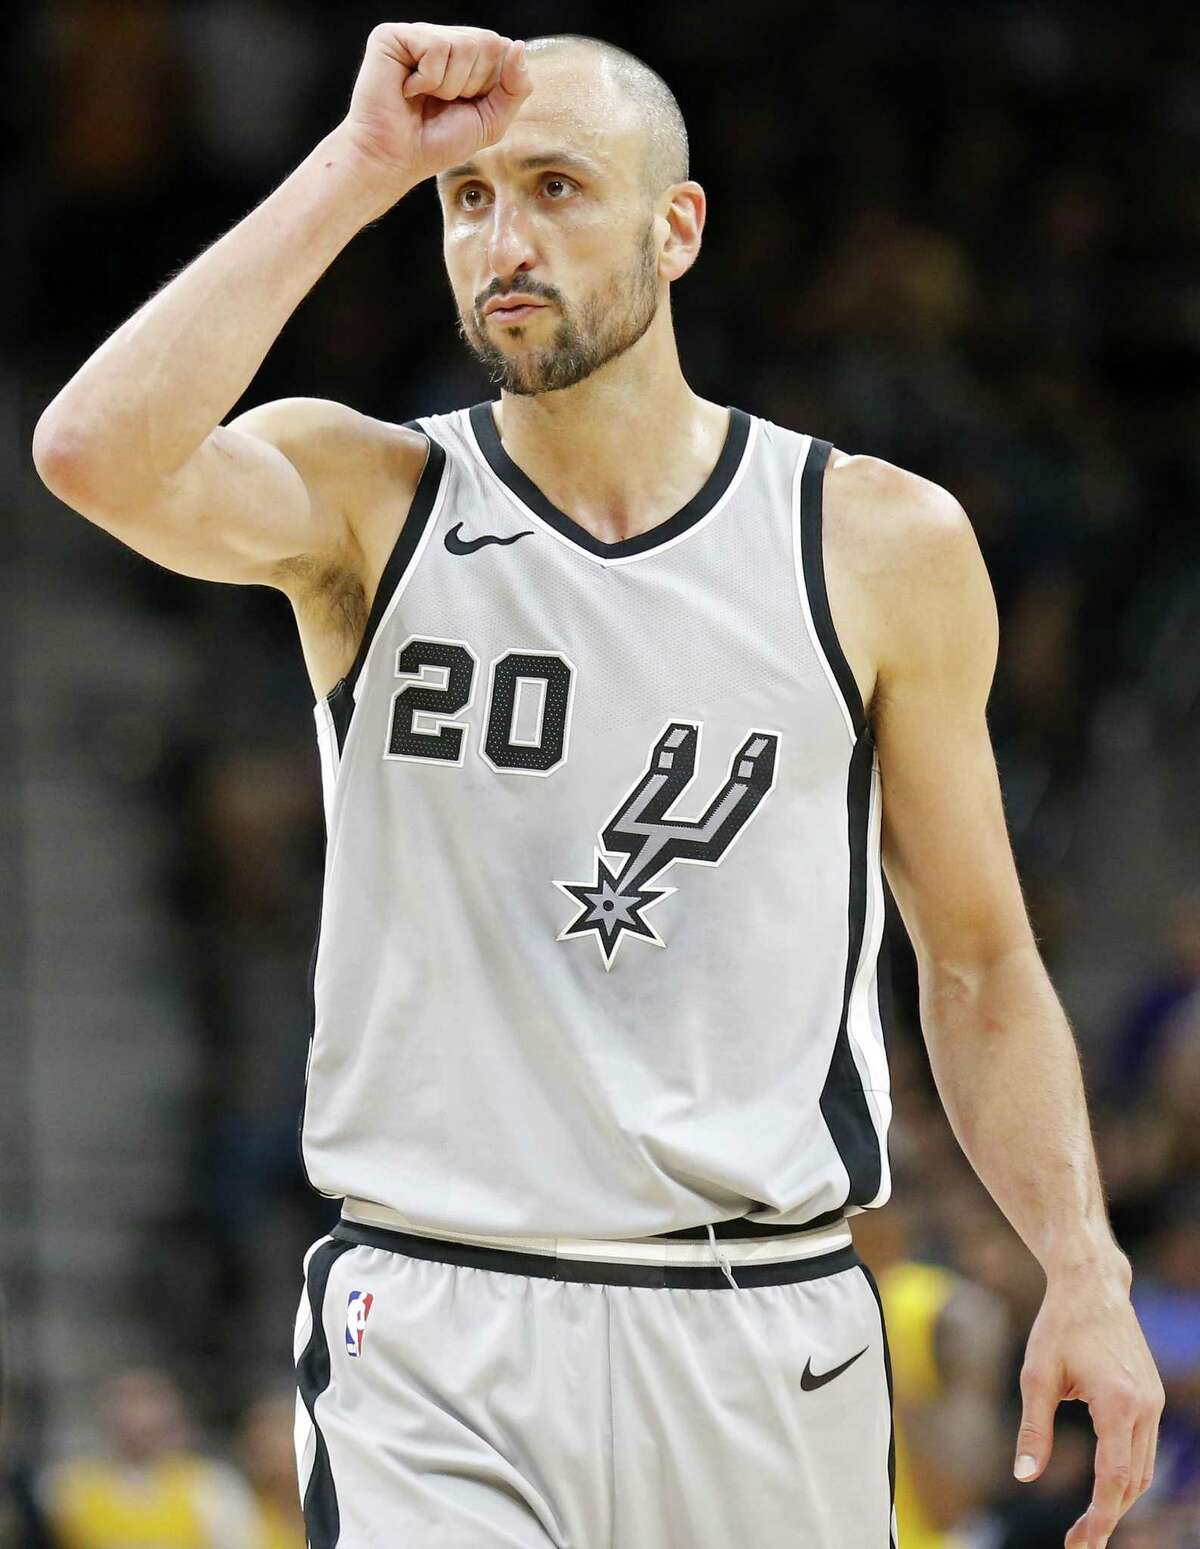 San Antonio Spurs guard Manu Ginobili (20) calls a play during second half action against the Los Angeles Lakers Saturday March. 3, 2018 at the AT&T Center. The Los Angeles Lakers won 116-112.